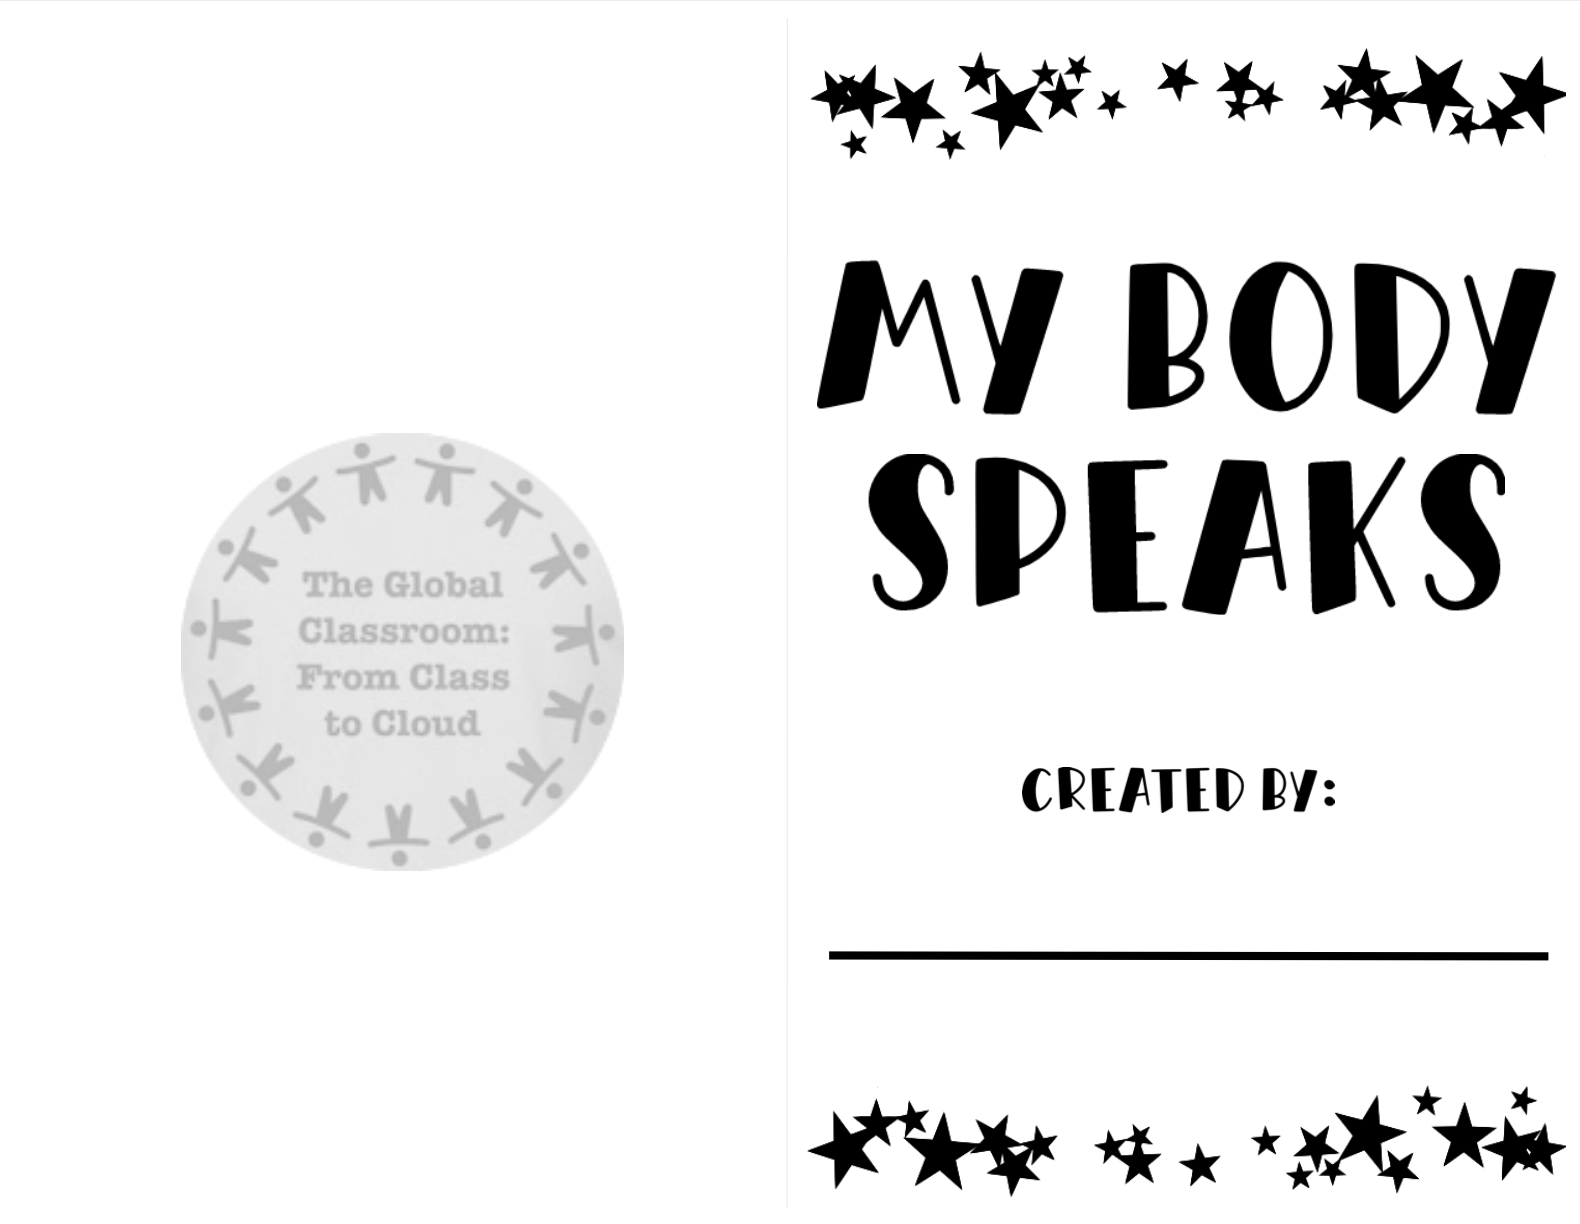 My Body Speaks cover page